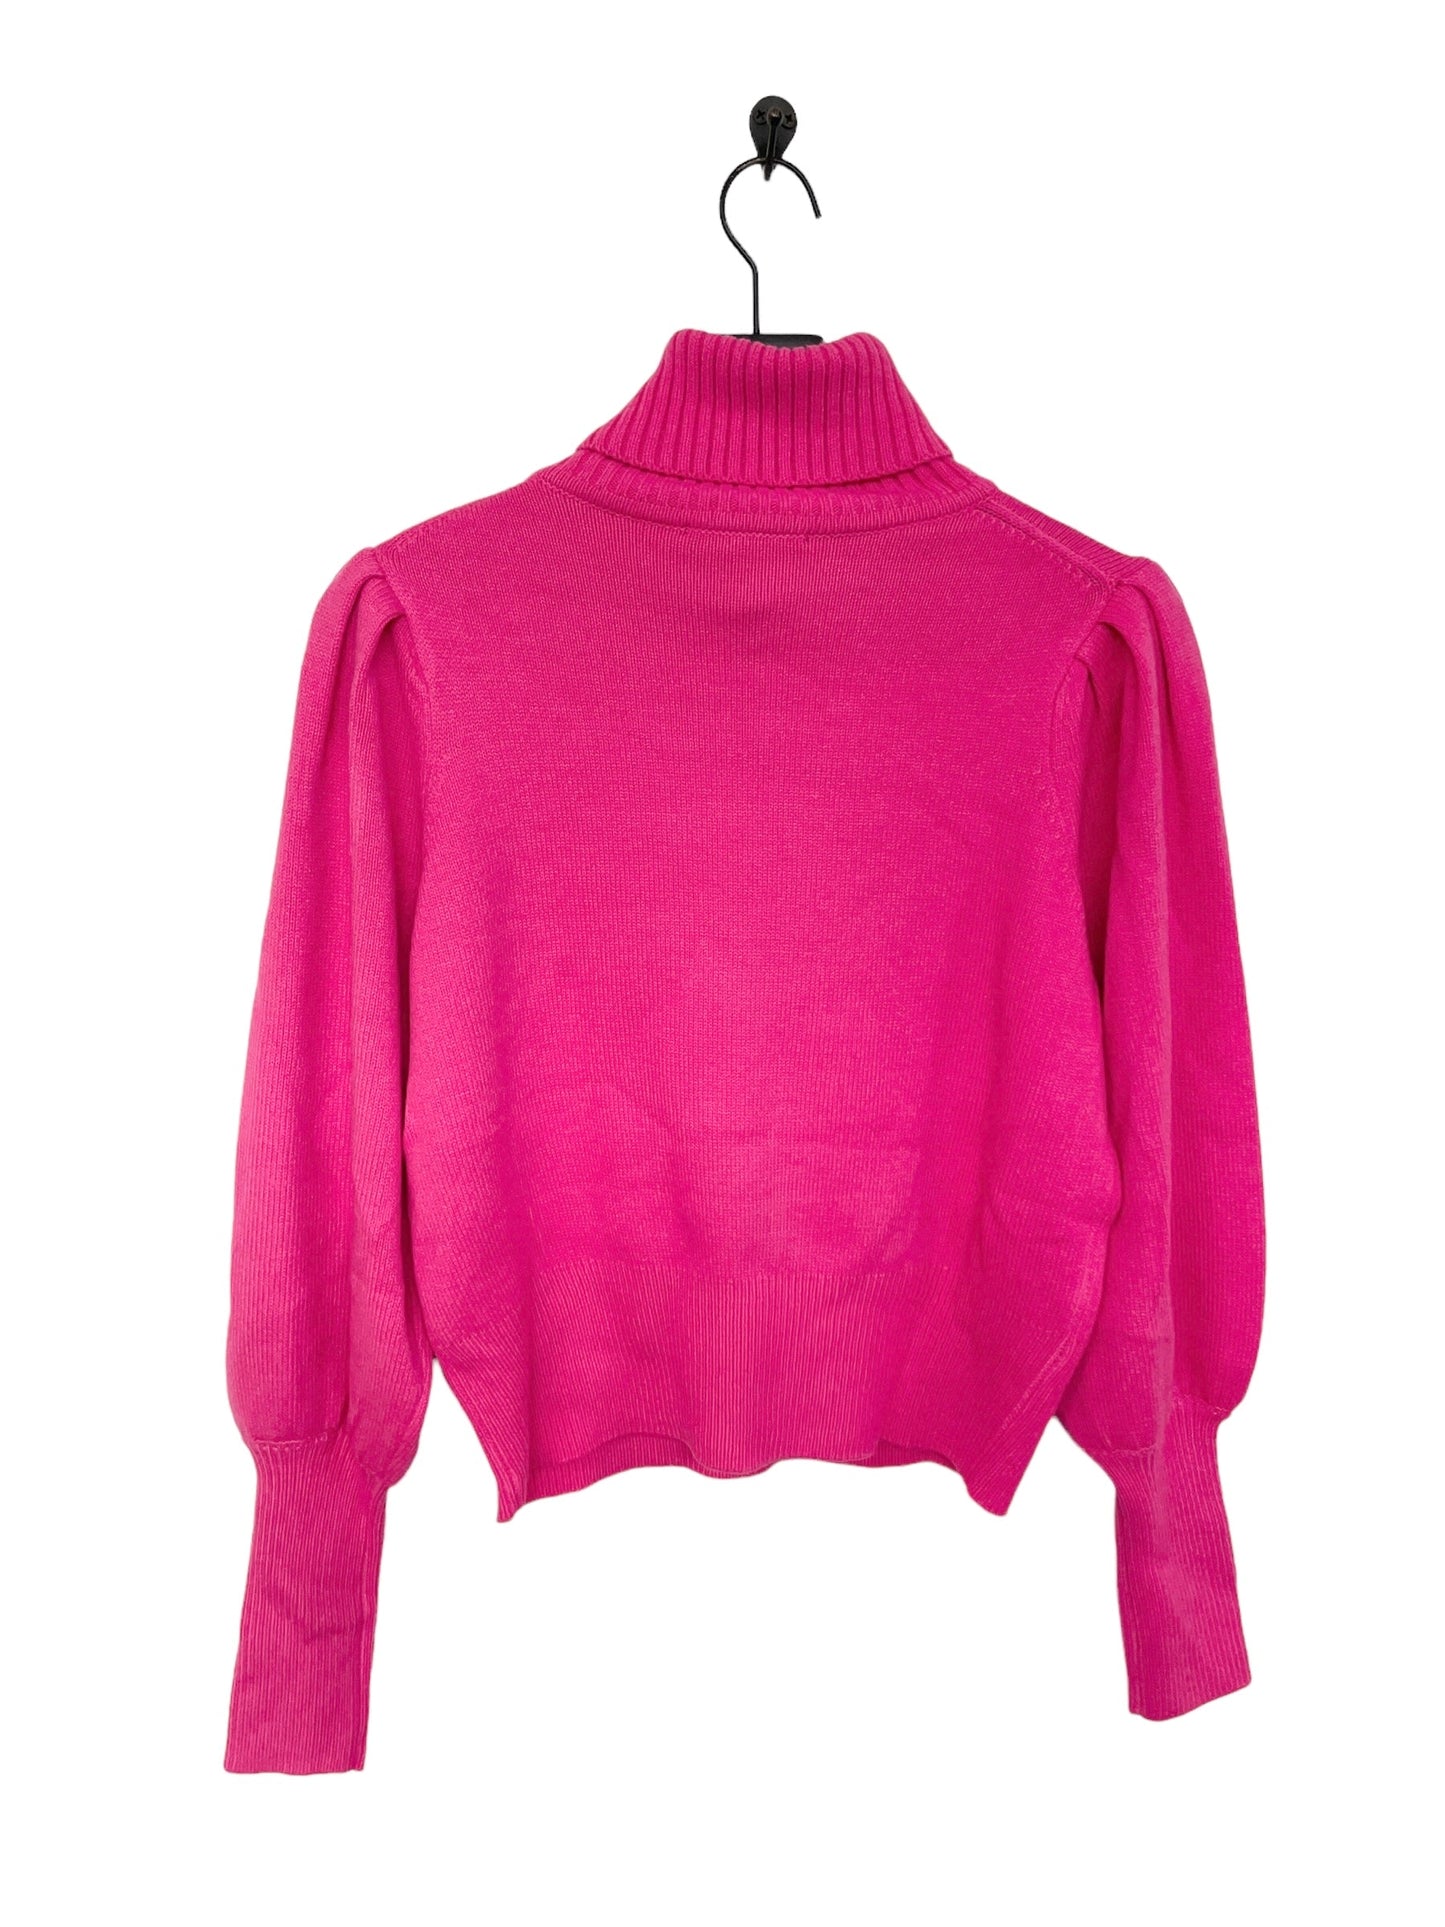 Hot Pink Sweater French Connection, Size S